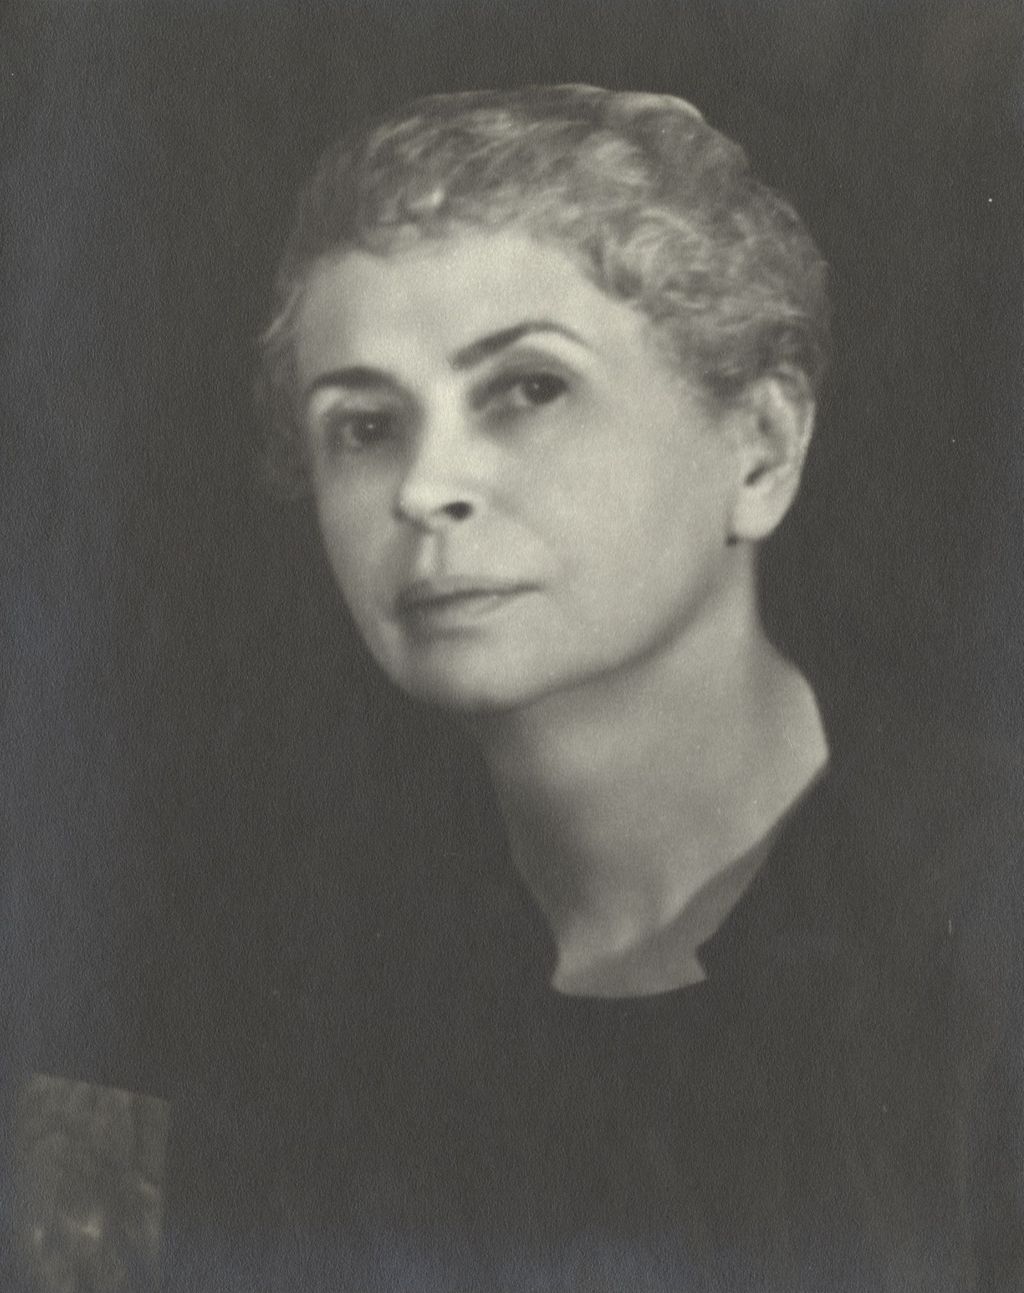 Miniature of Hull-House resident and art, theater, and dance instructor Edith de Nancrede